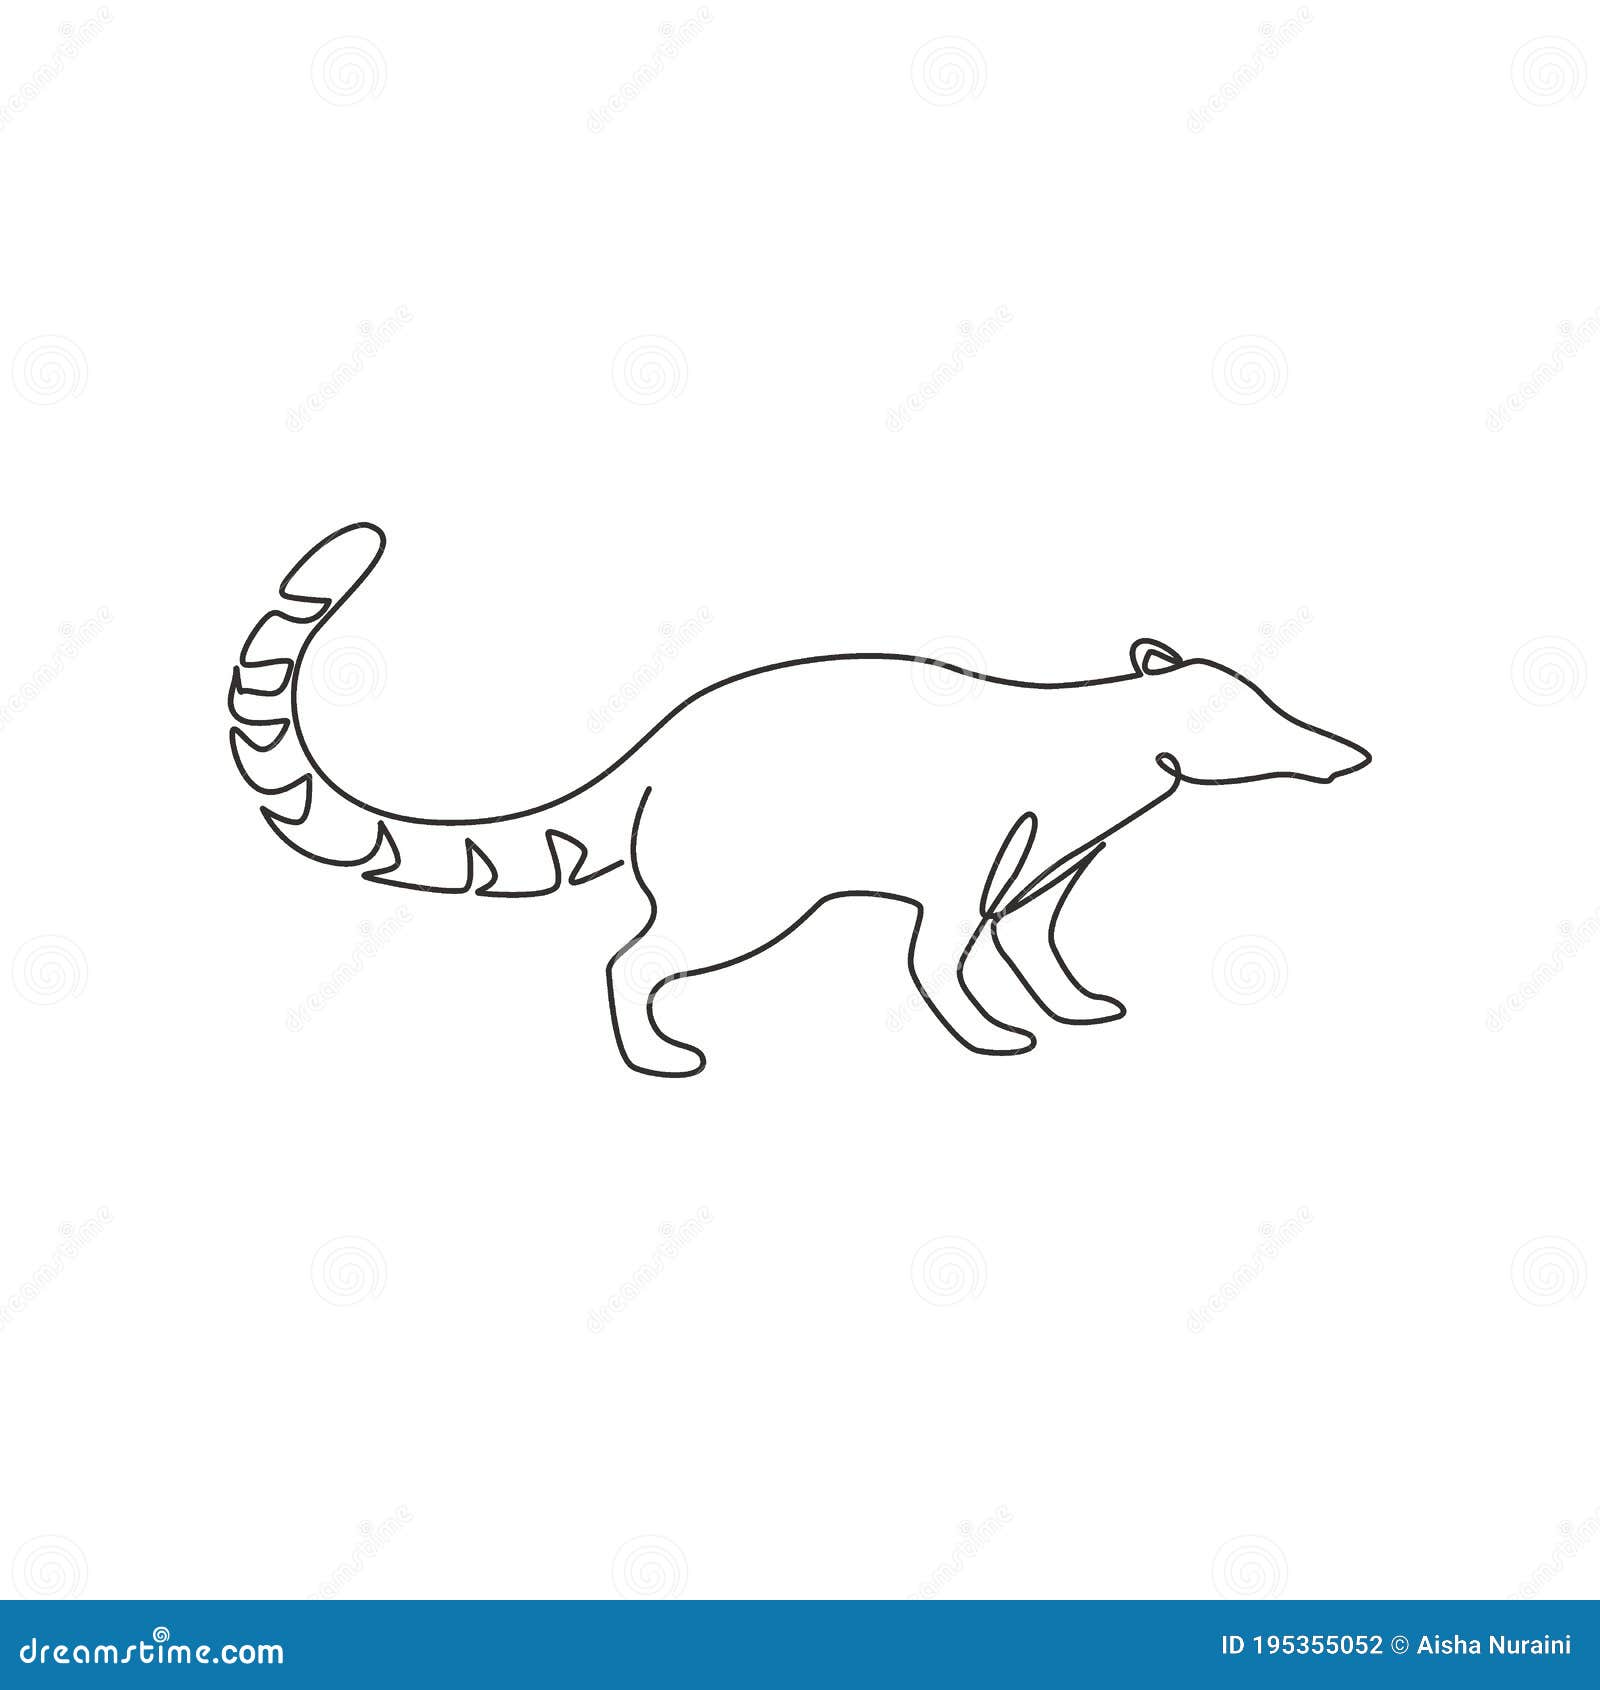 one continuous line drawing of cute coati for company logo identity. diurnal mammals mascot concept for national zoo icon. modern